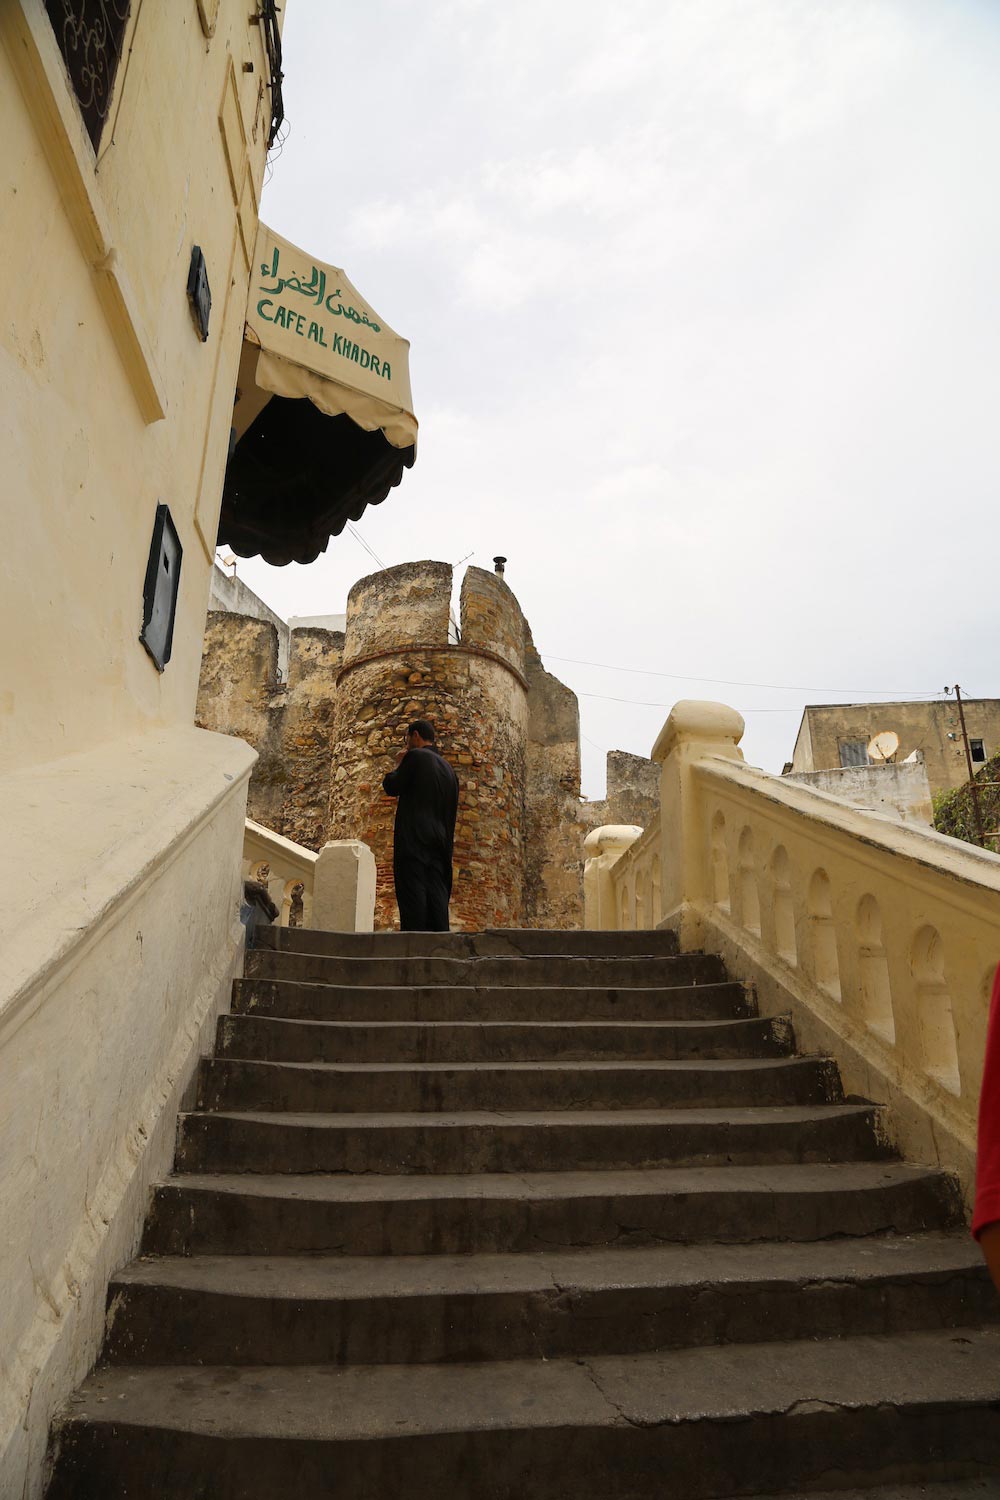 View up the stairs into the medina